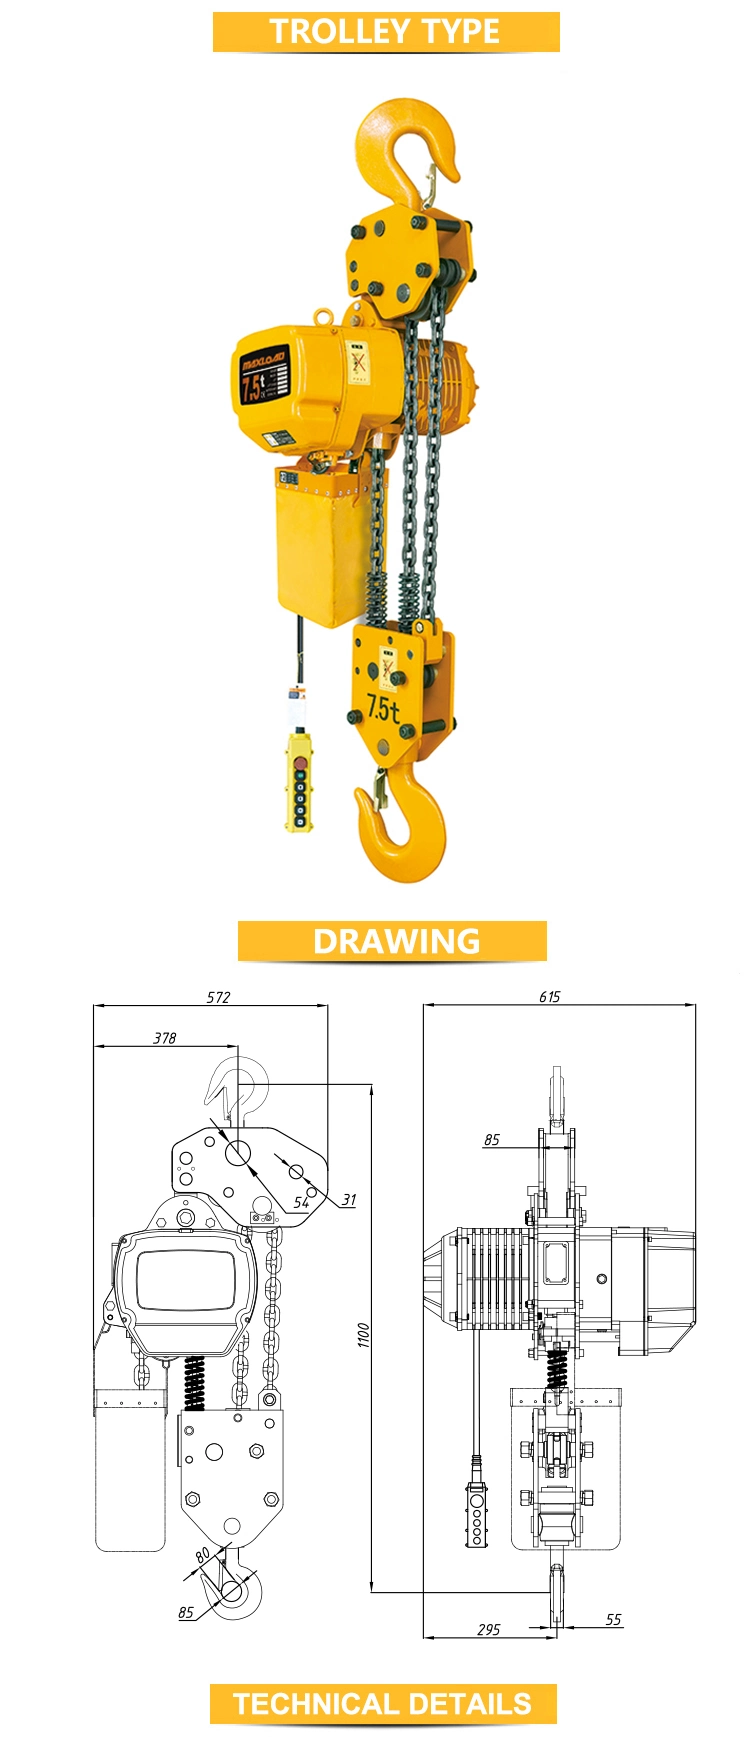 Fixed Model 7.5t Electric Chain Hoist for Sale Popular in China